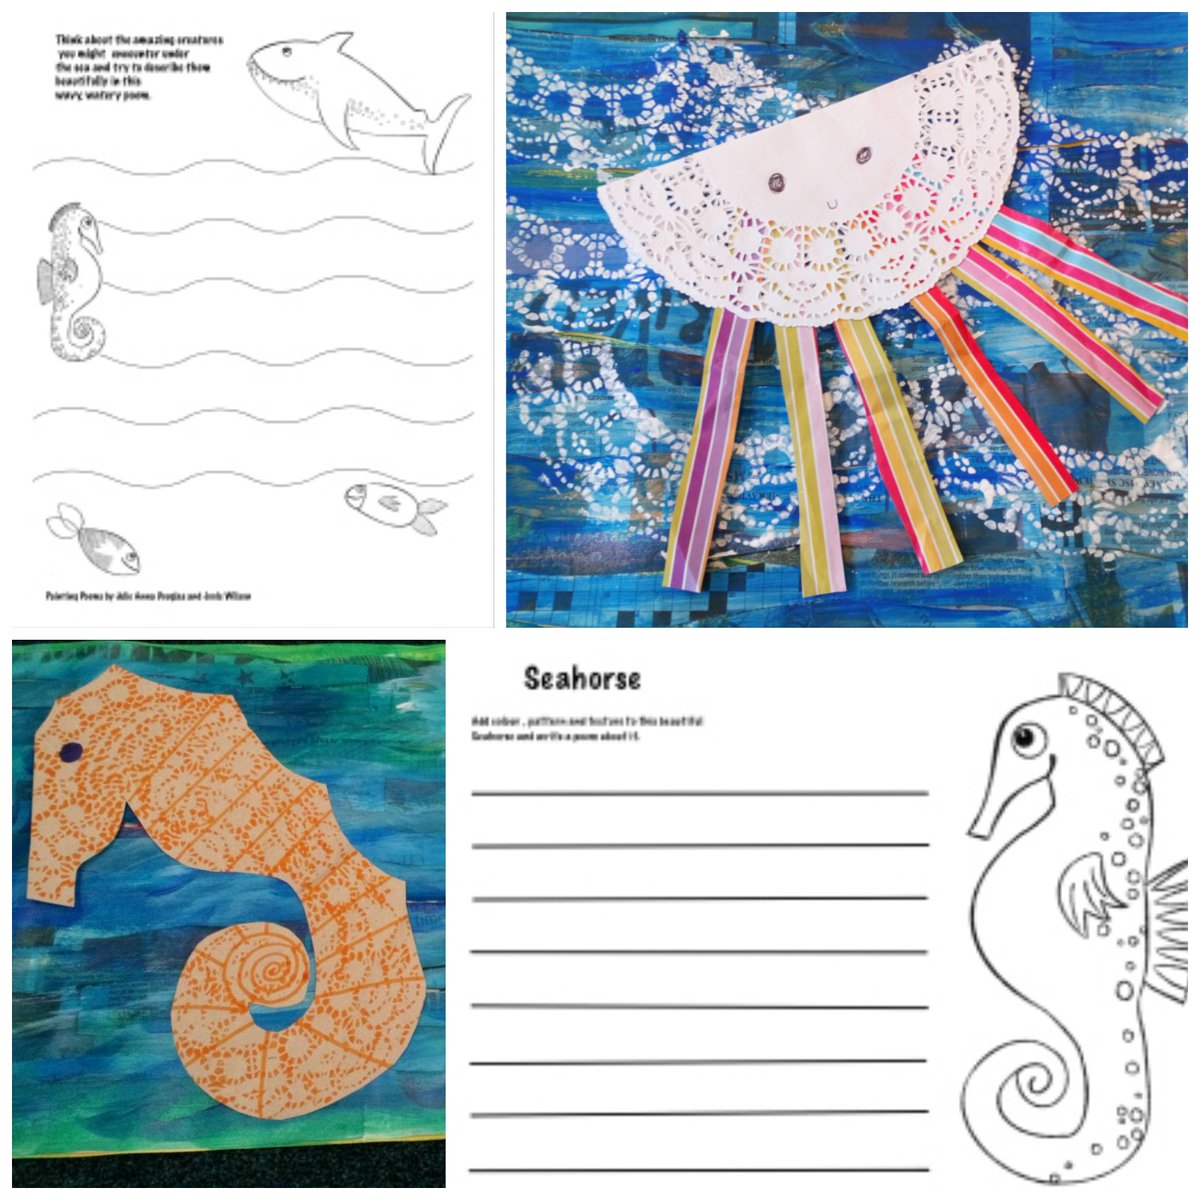 10. You can find lots of ideas and free activity resources created by  @JoolsAWilson inspired by the poems and art in our book,  #PaintingPoems here:  https://joolswilson.com/painting-poems/   https://joolswilson.com/blog/  Happy Poeting 